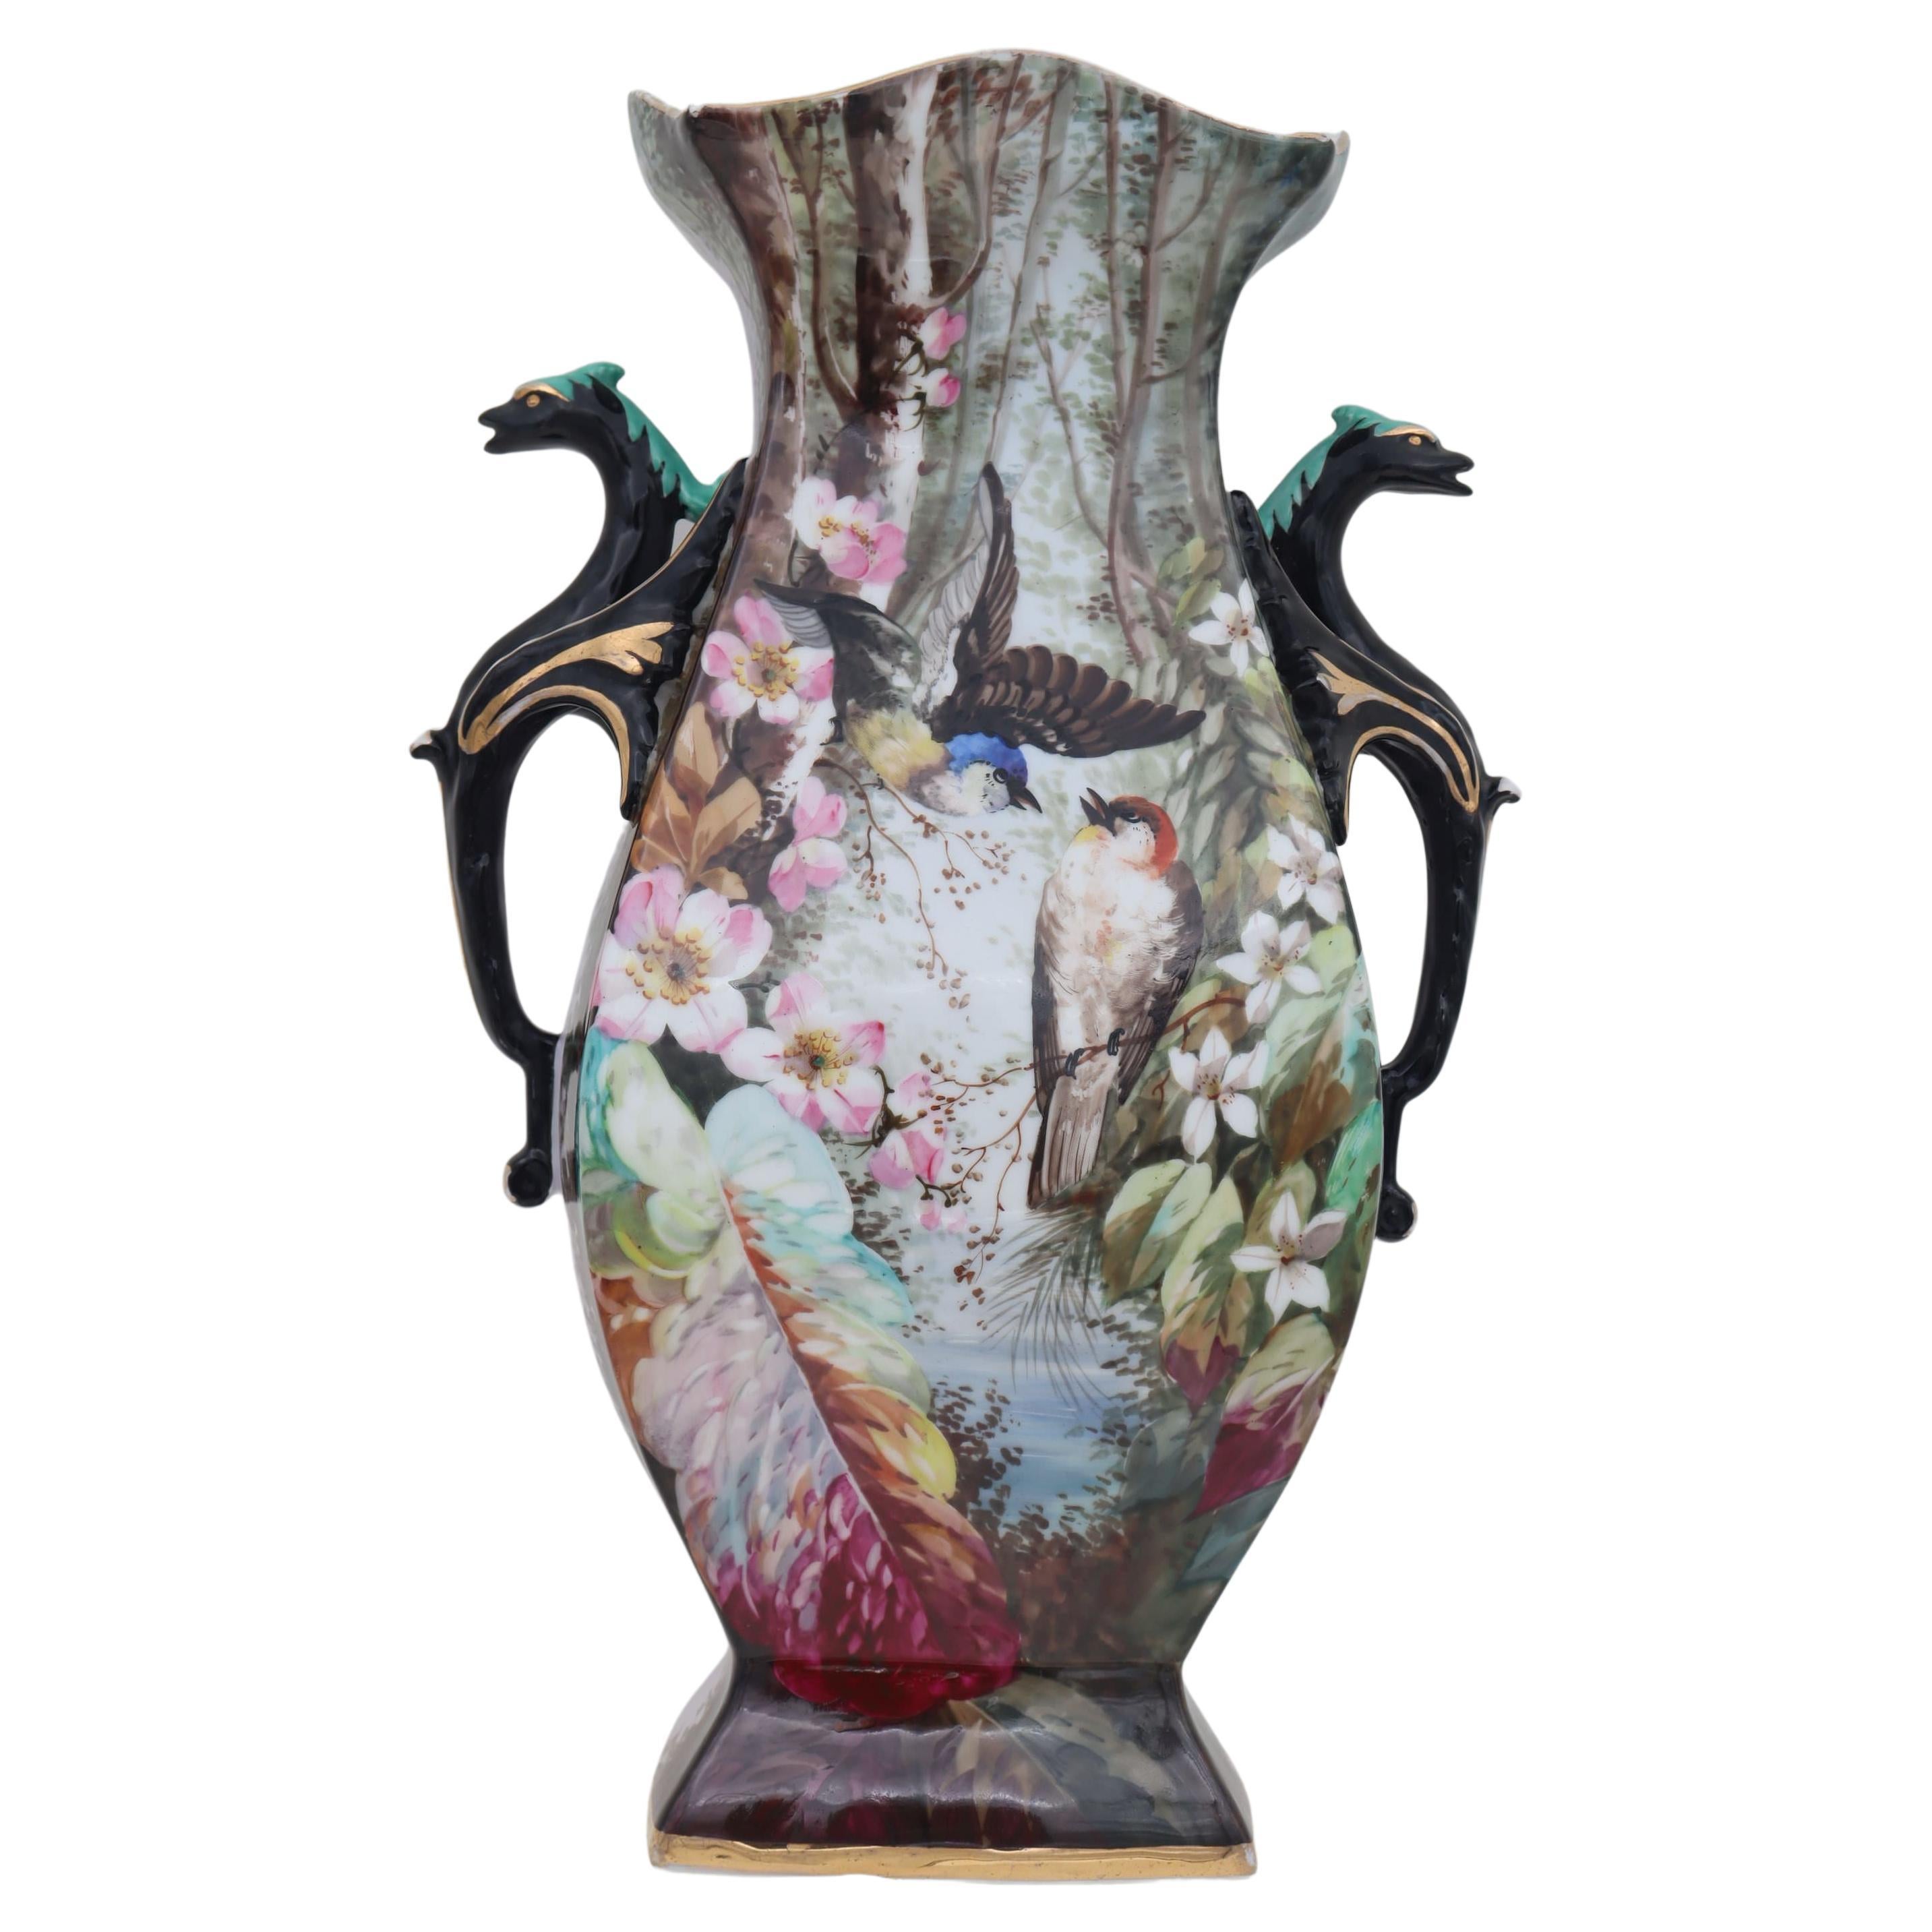 Large French Hand Painted Vase